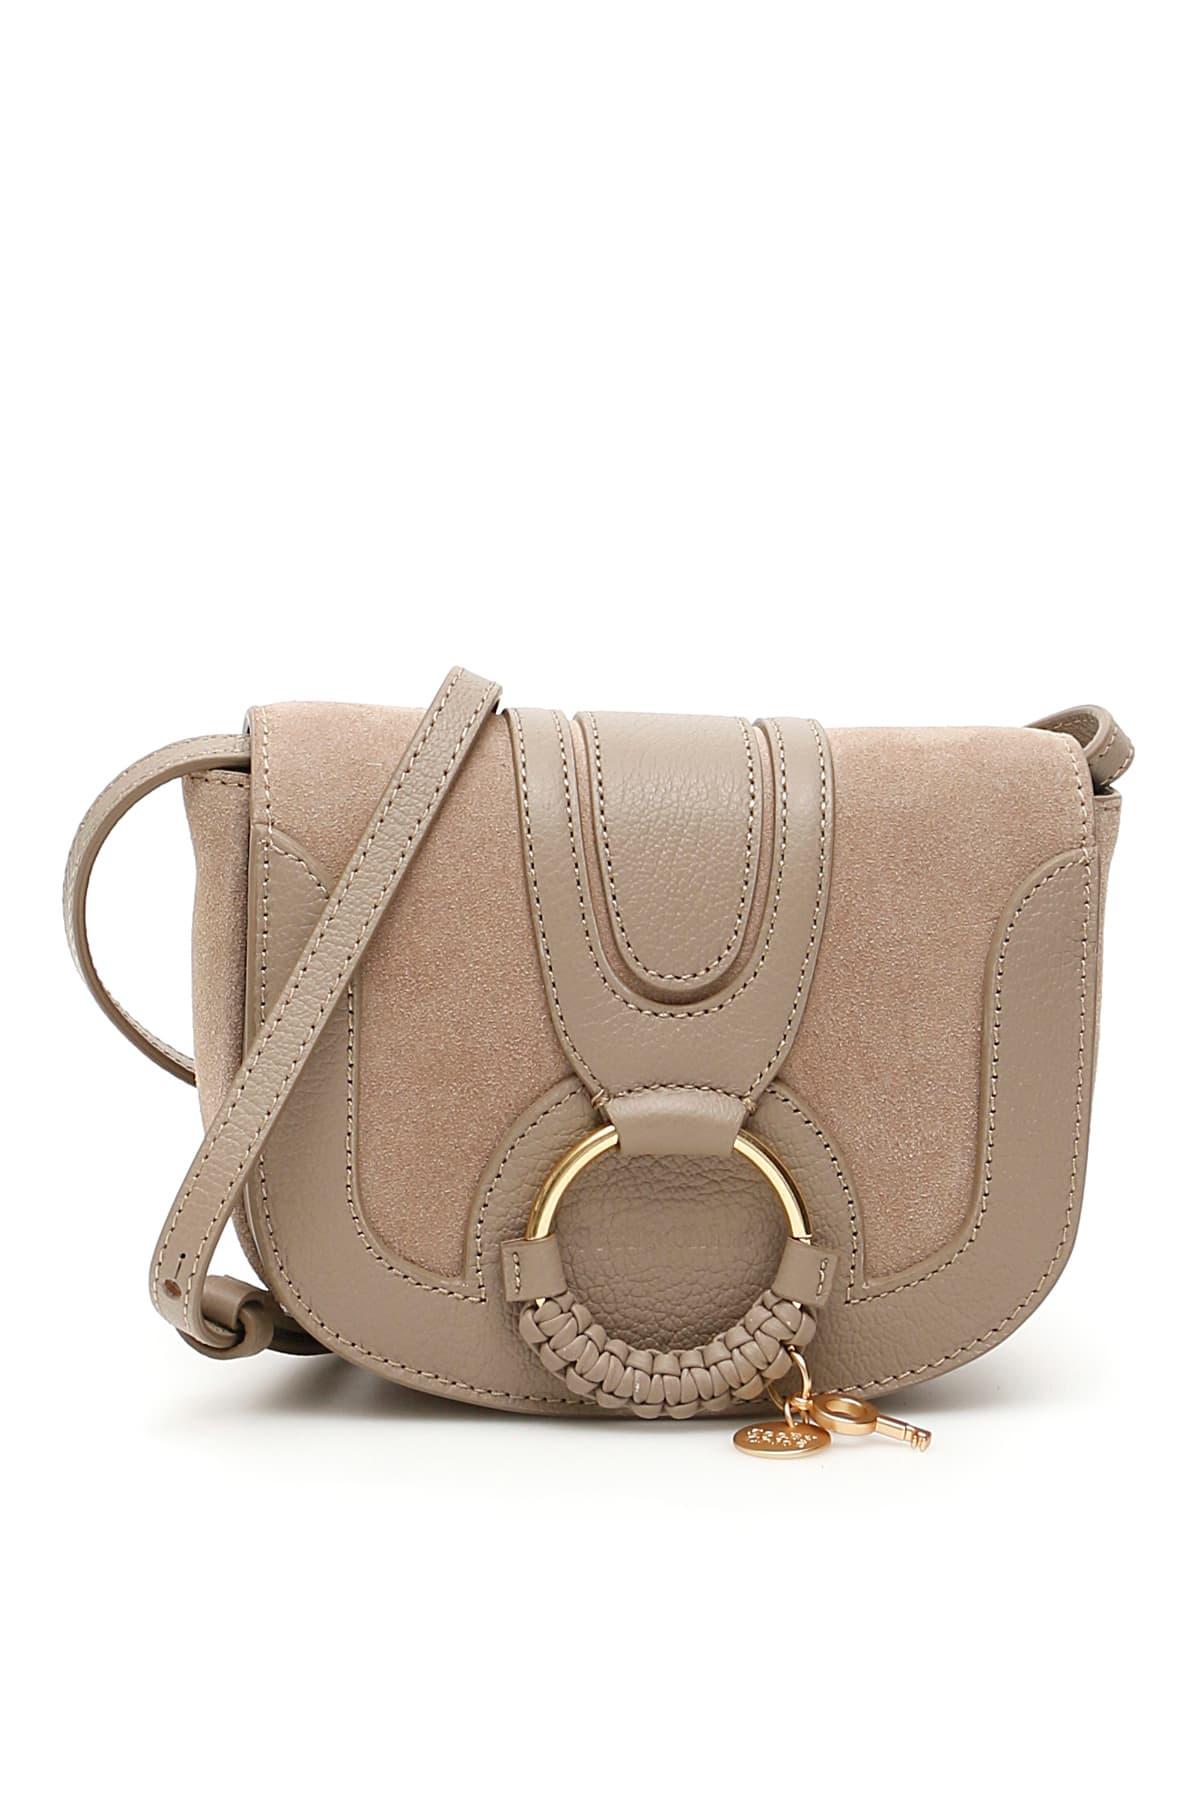 See By Chloé Leather Mini Hana Shoulder Bag in Beige,Grey (Natural) - Lyst